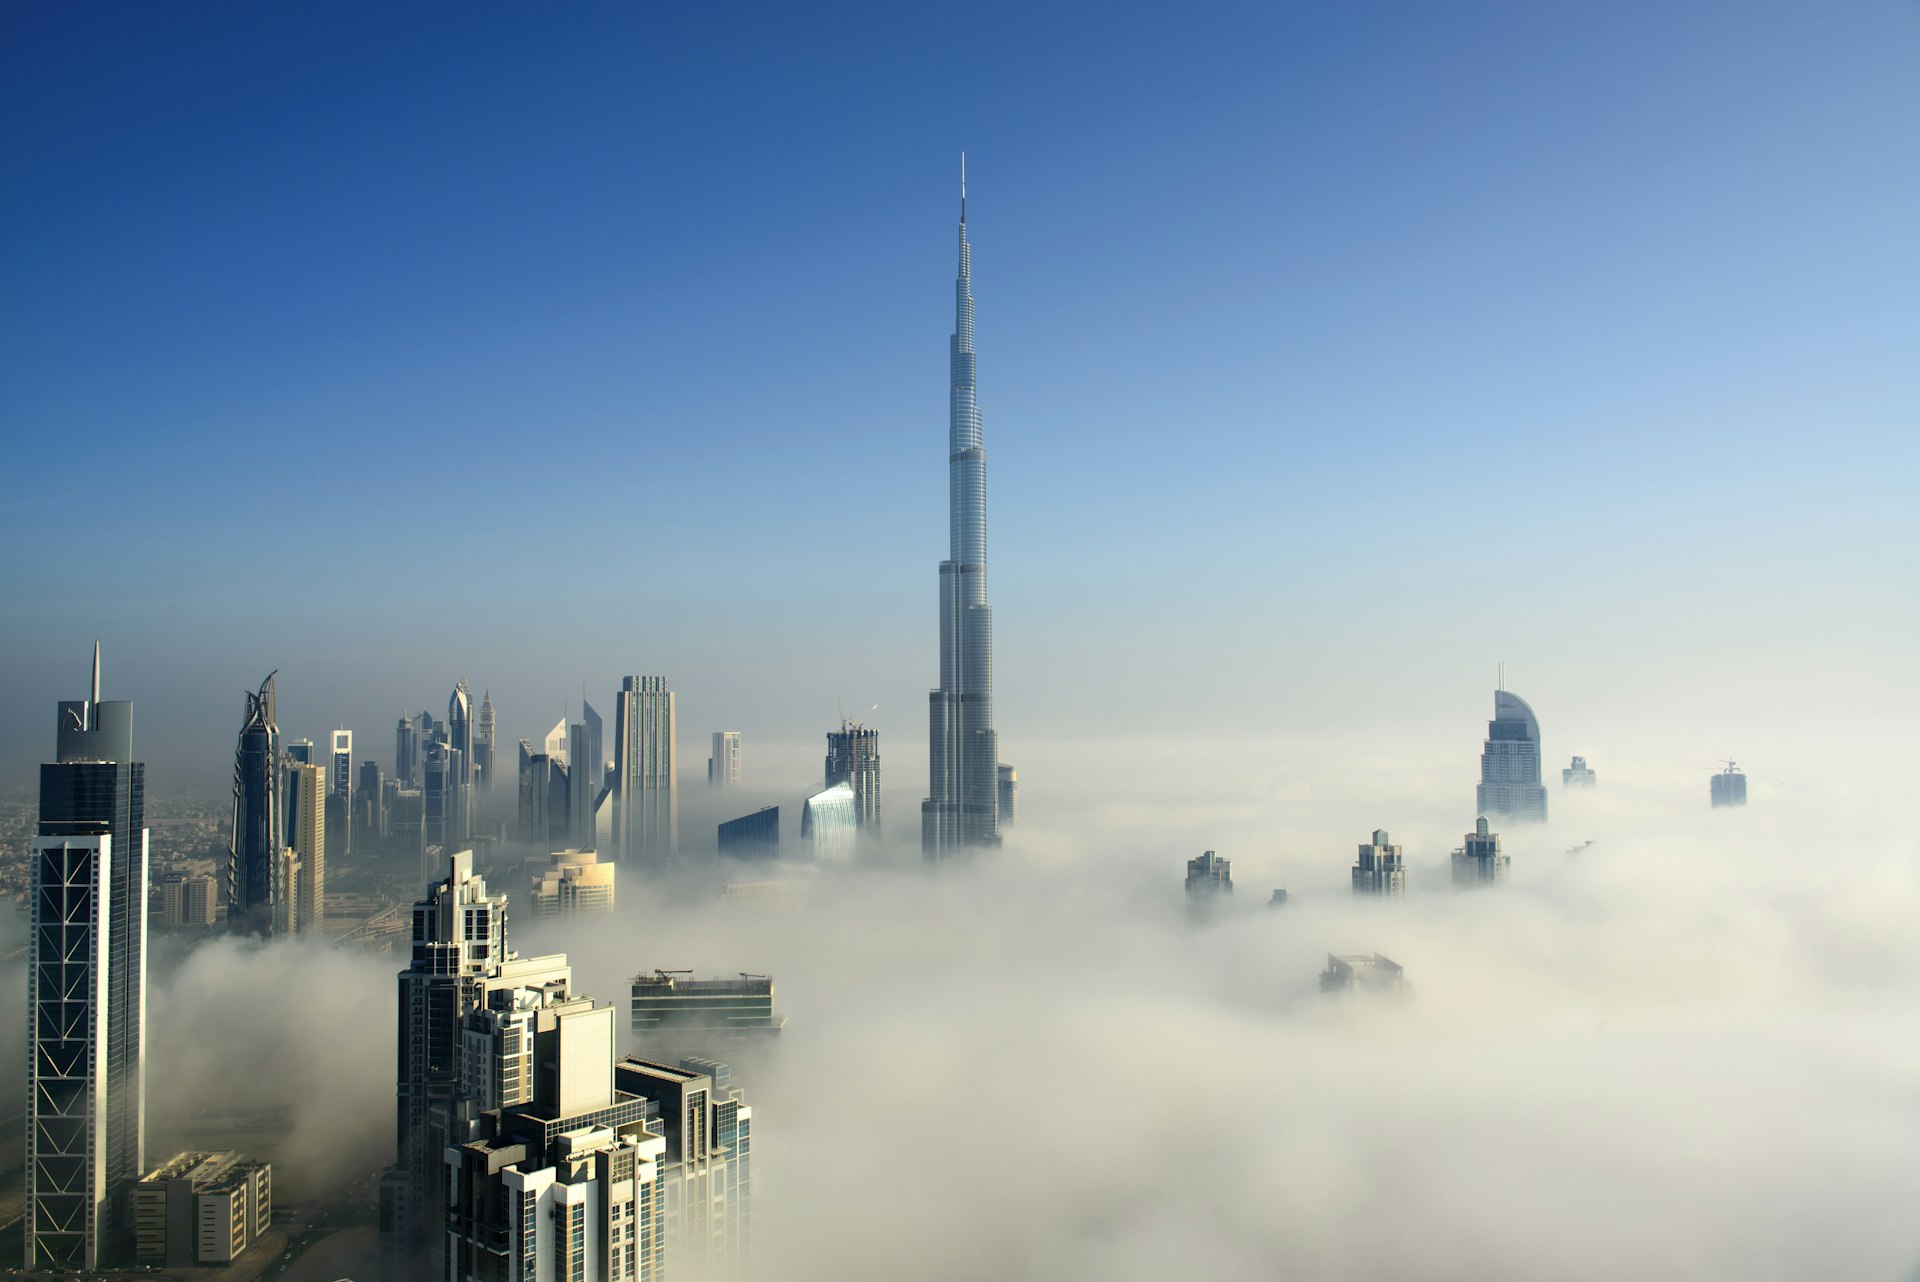 Foggy morning in downtown Dubai, United Arab Emirates. The city's many skyscrapers are poking through thick cloud, into a blue sky, with the Burj Khalifa in the centre of the frame.